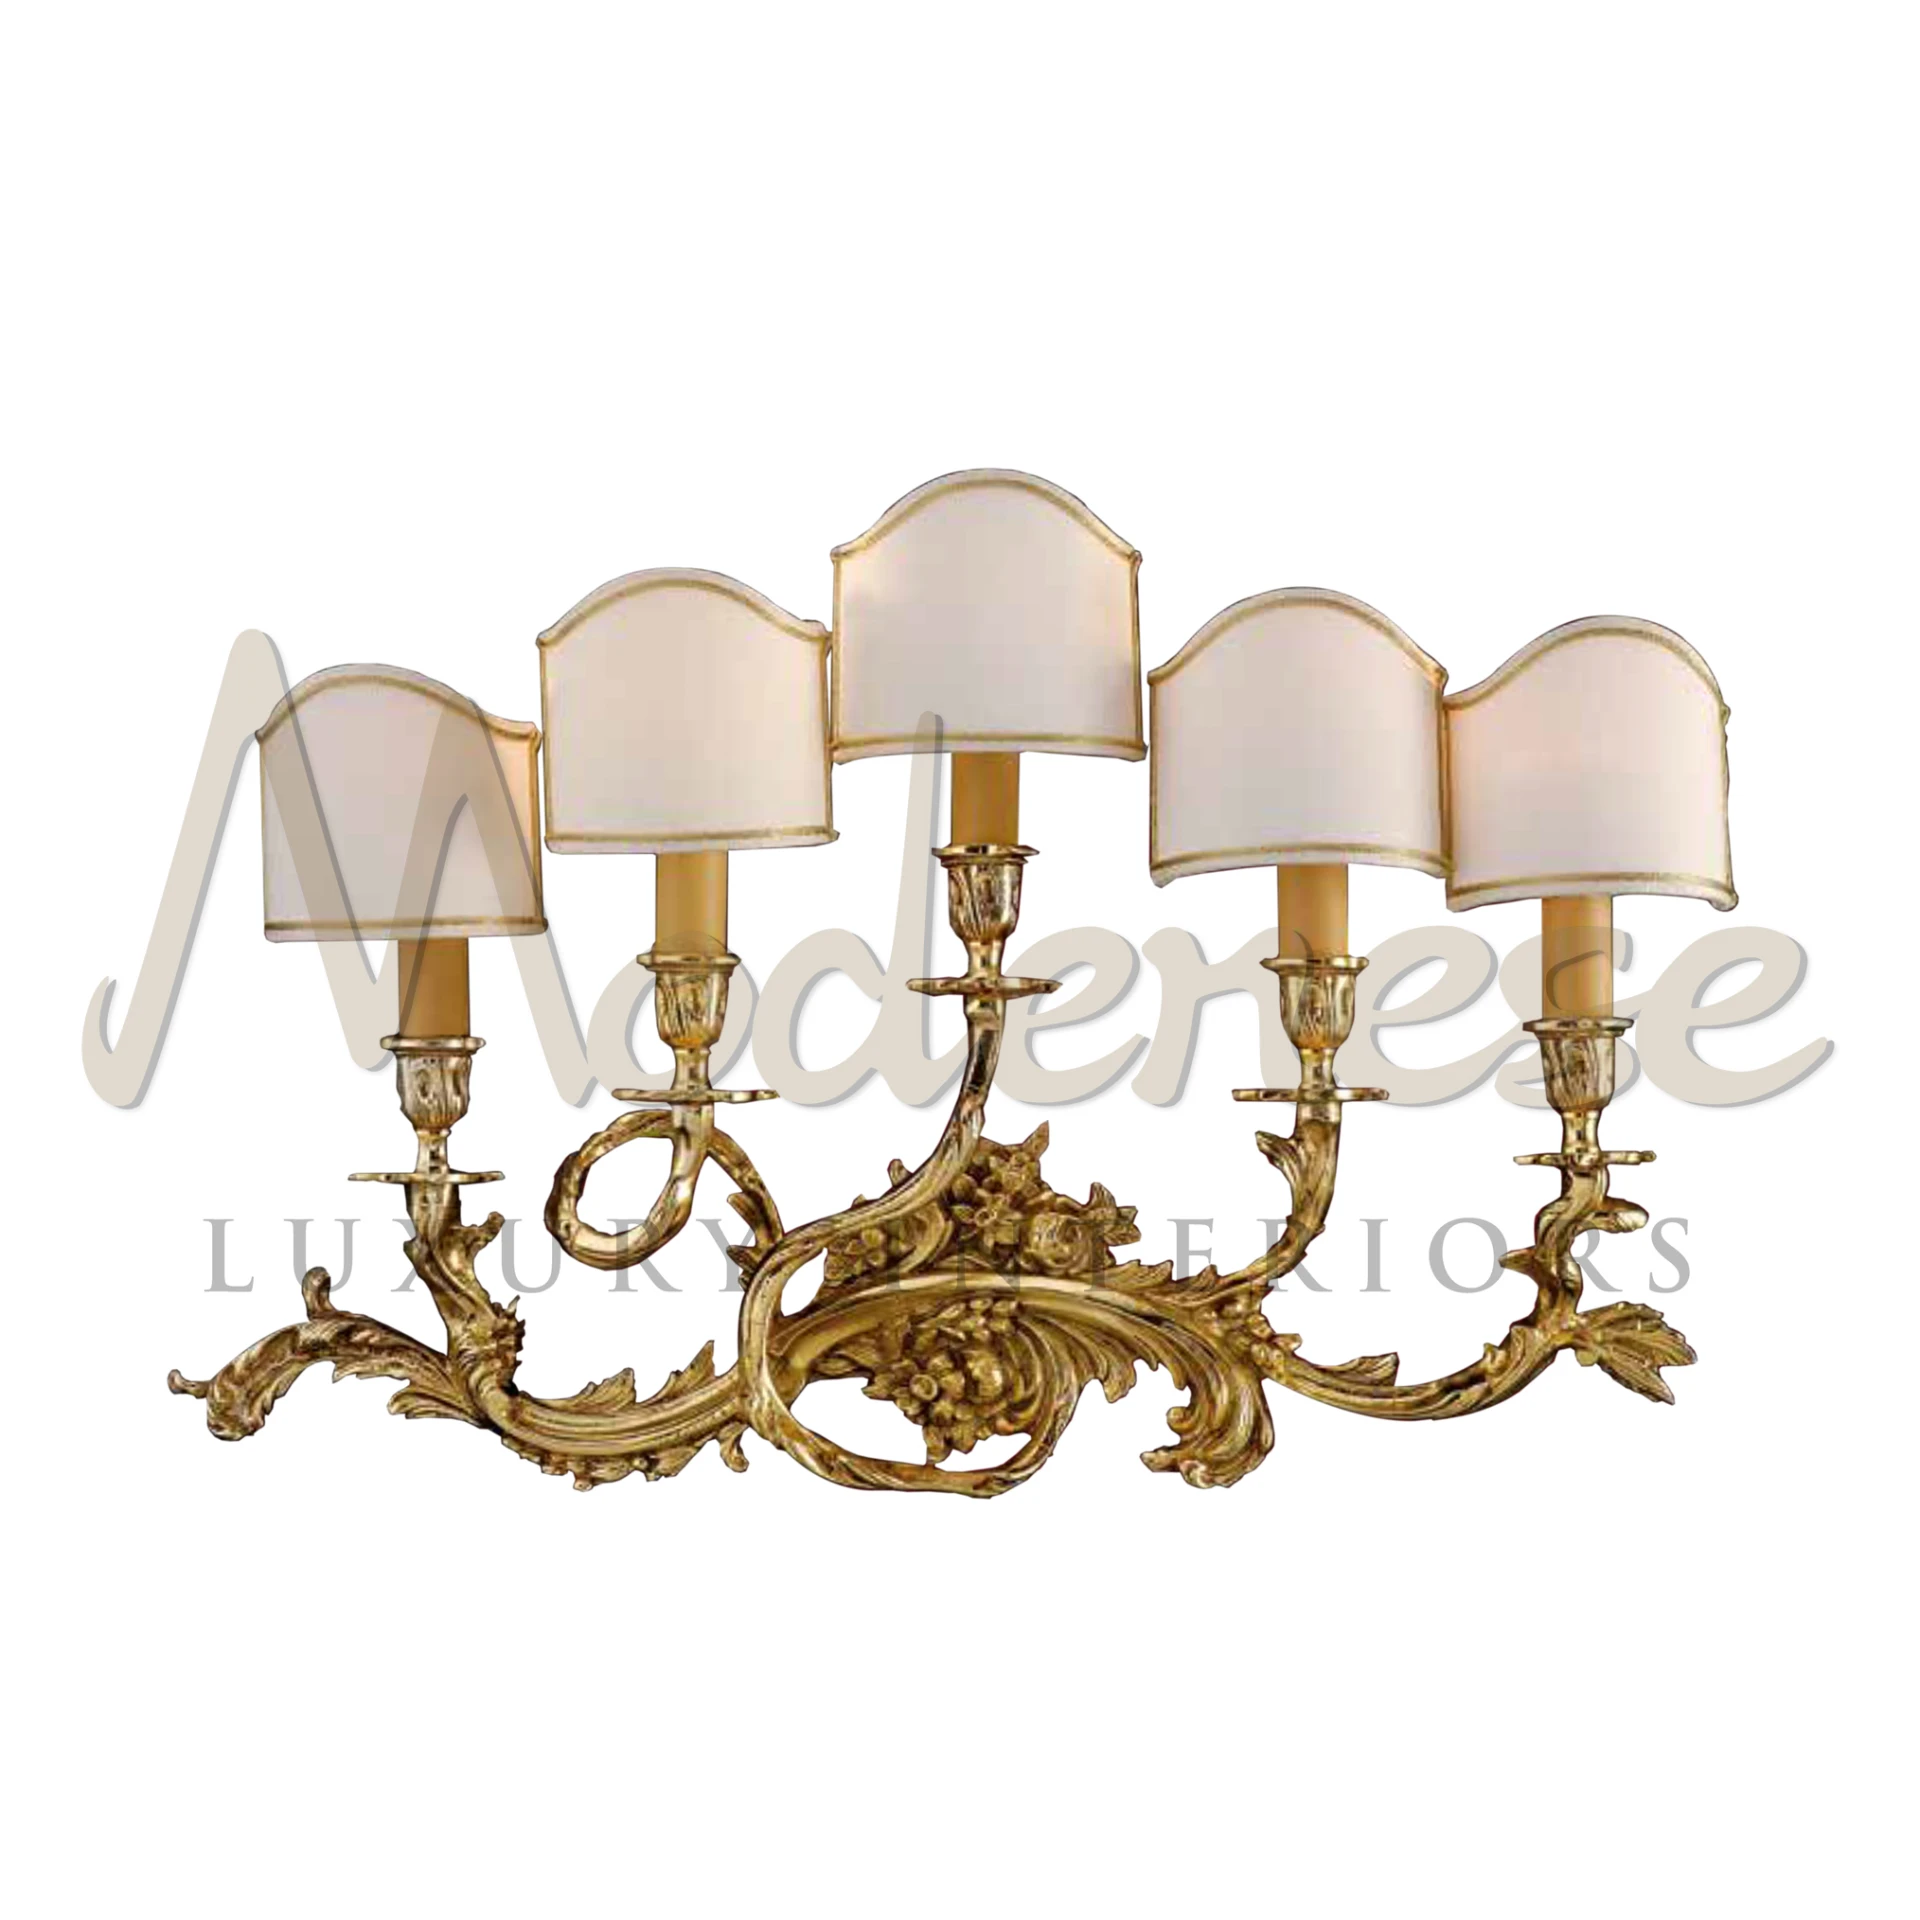 Luxurious Renaissance Wall Fixture in gold with intricate detailing and white shades.